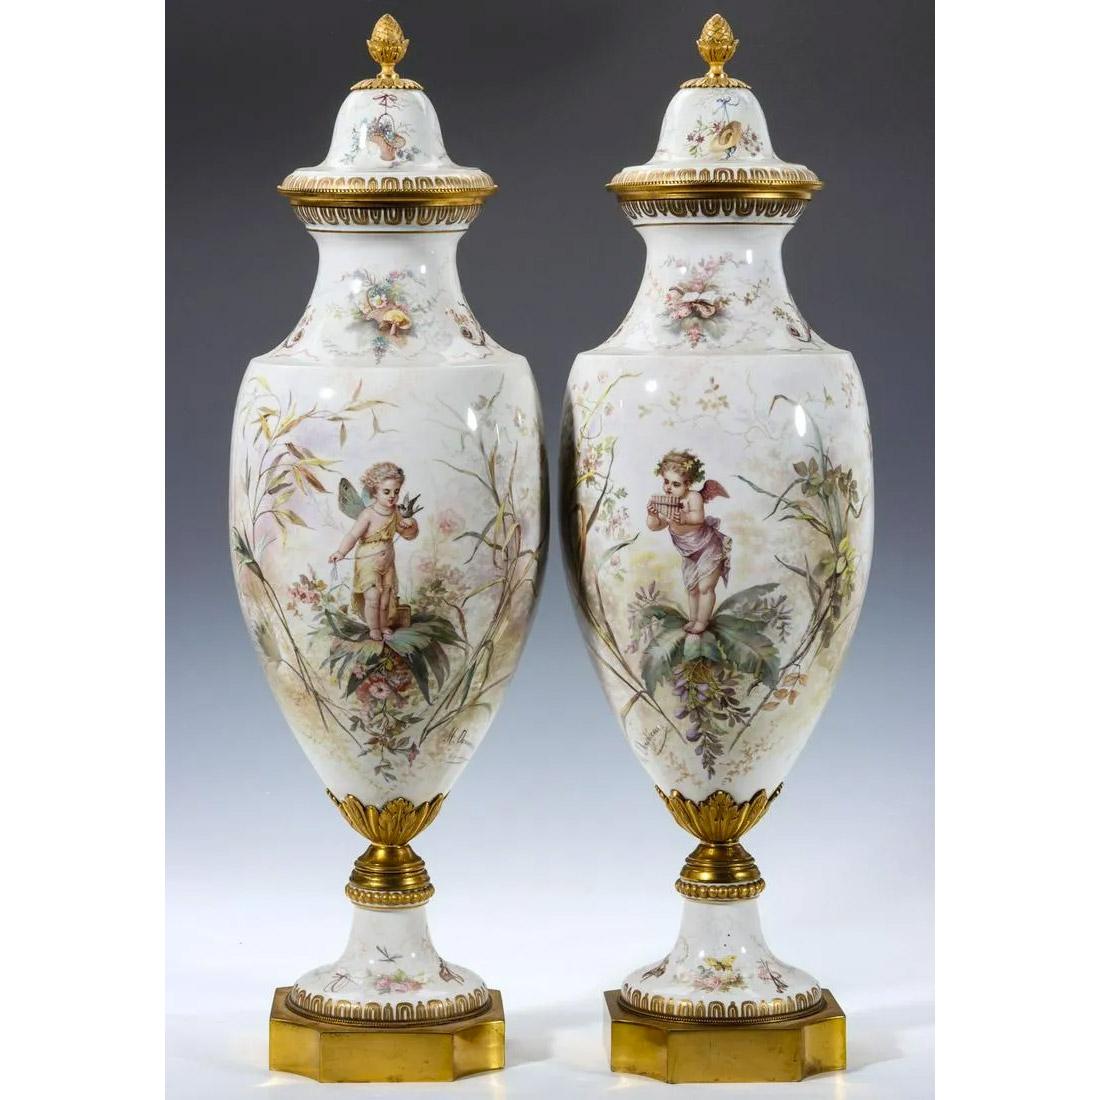 Gilt Fine Quality Pair of Sèvres Style Porcelain Vases and Cover by M. Demonceaux For Sale